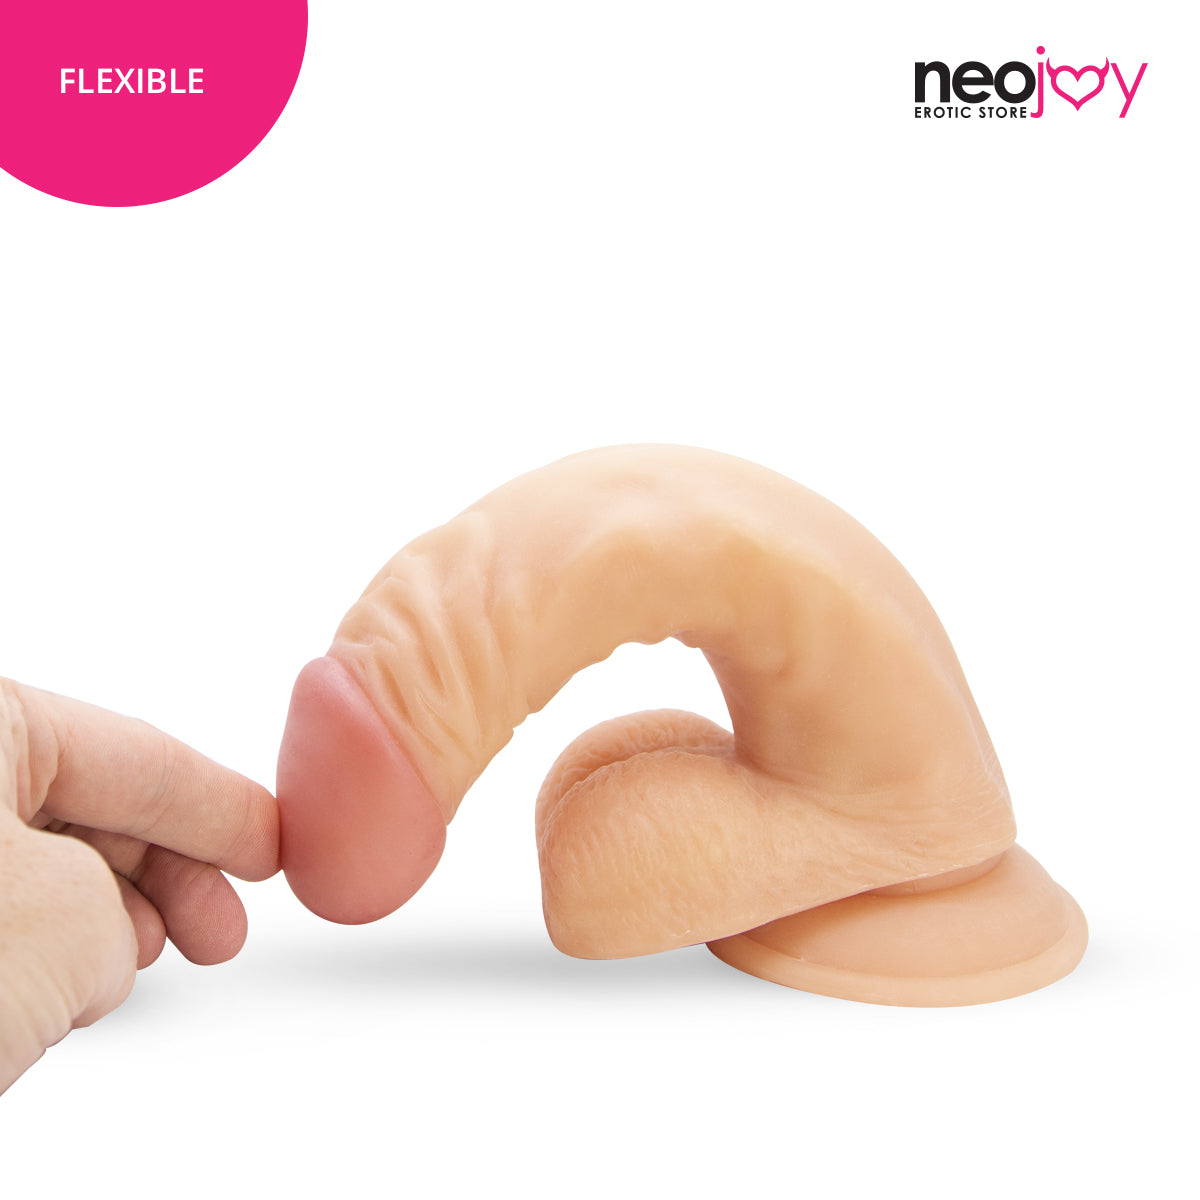 Neojoy - James Dick Dildo With Strap-On Dong Pegging - Flesh - 22cm - 8.7 inch